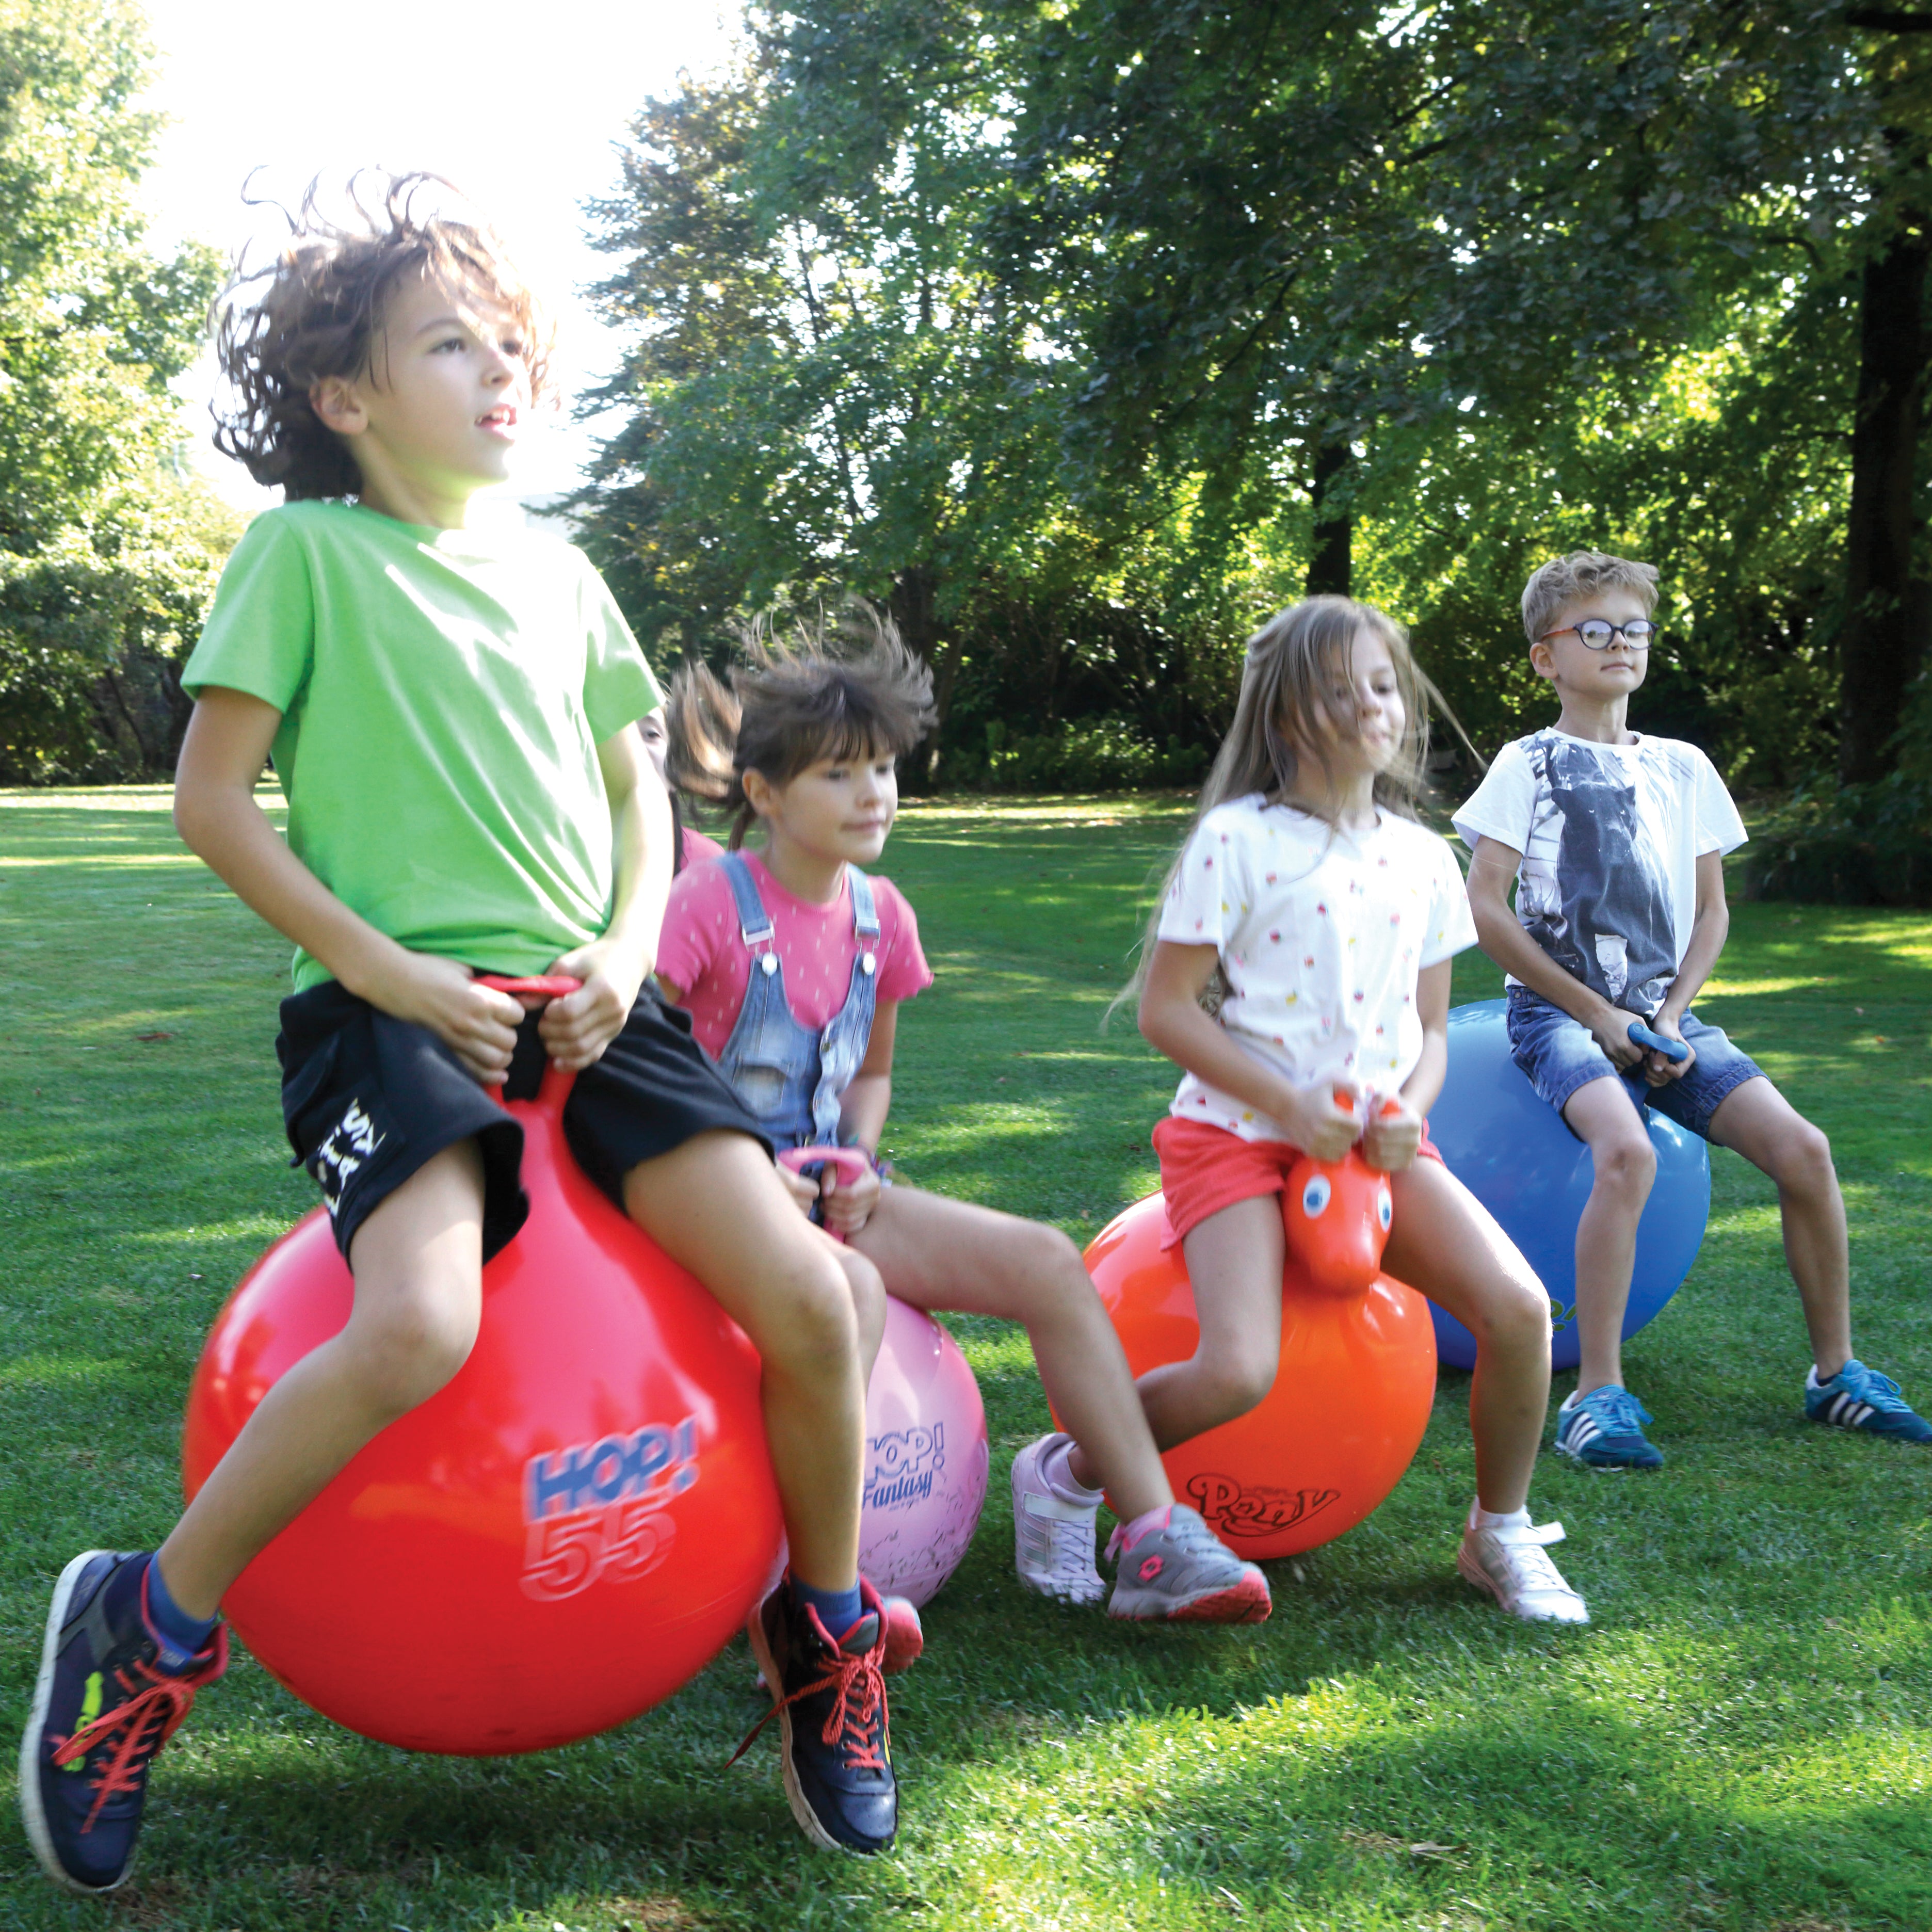 Children playing on the hop balls